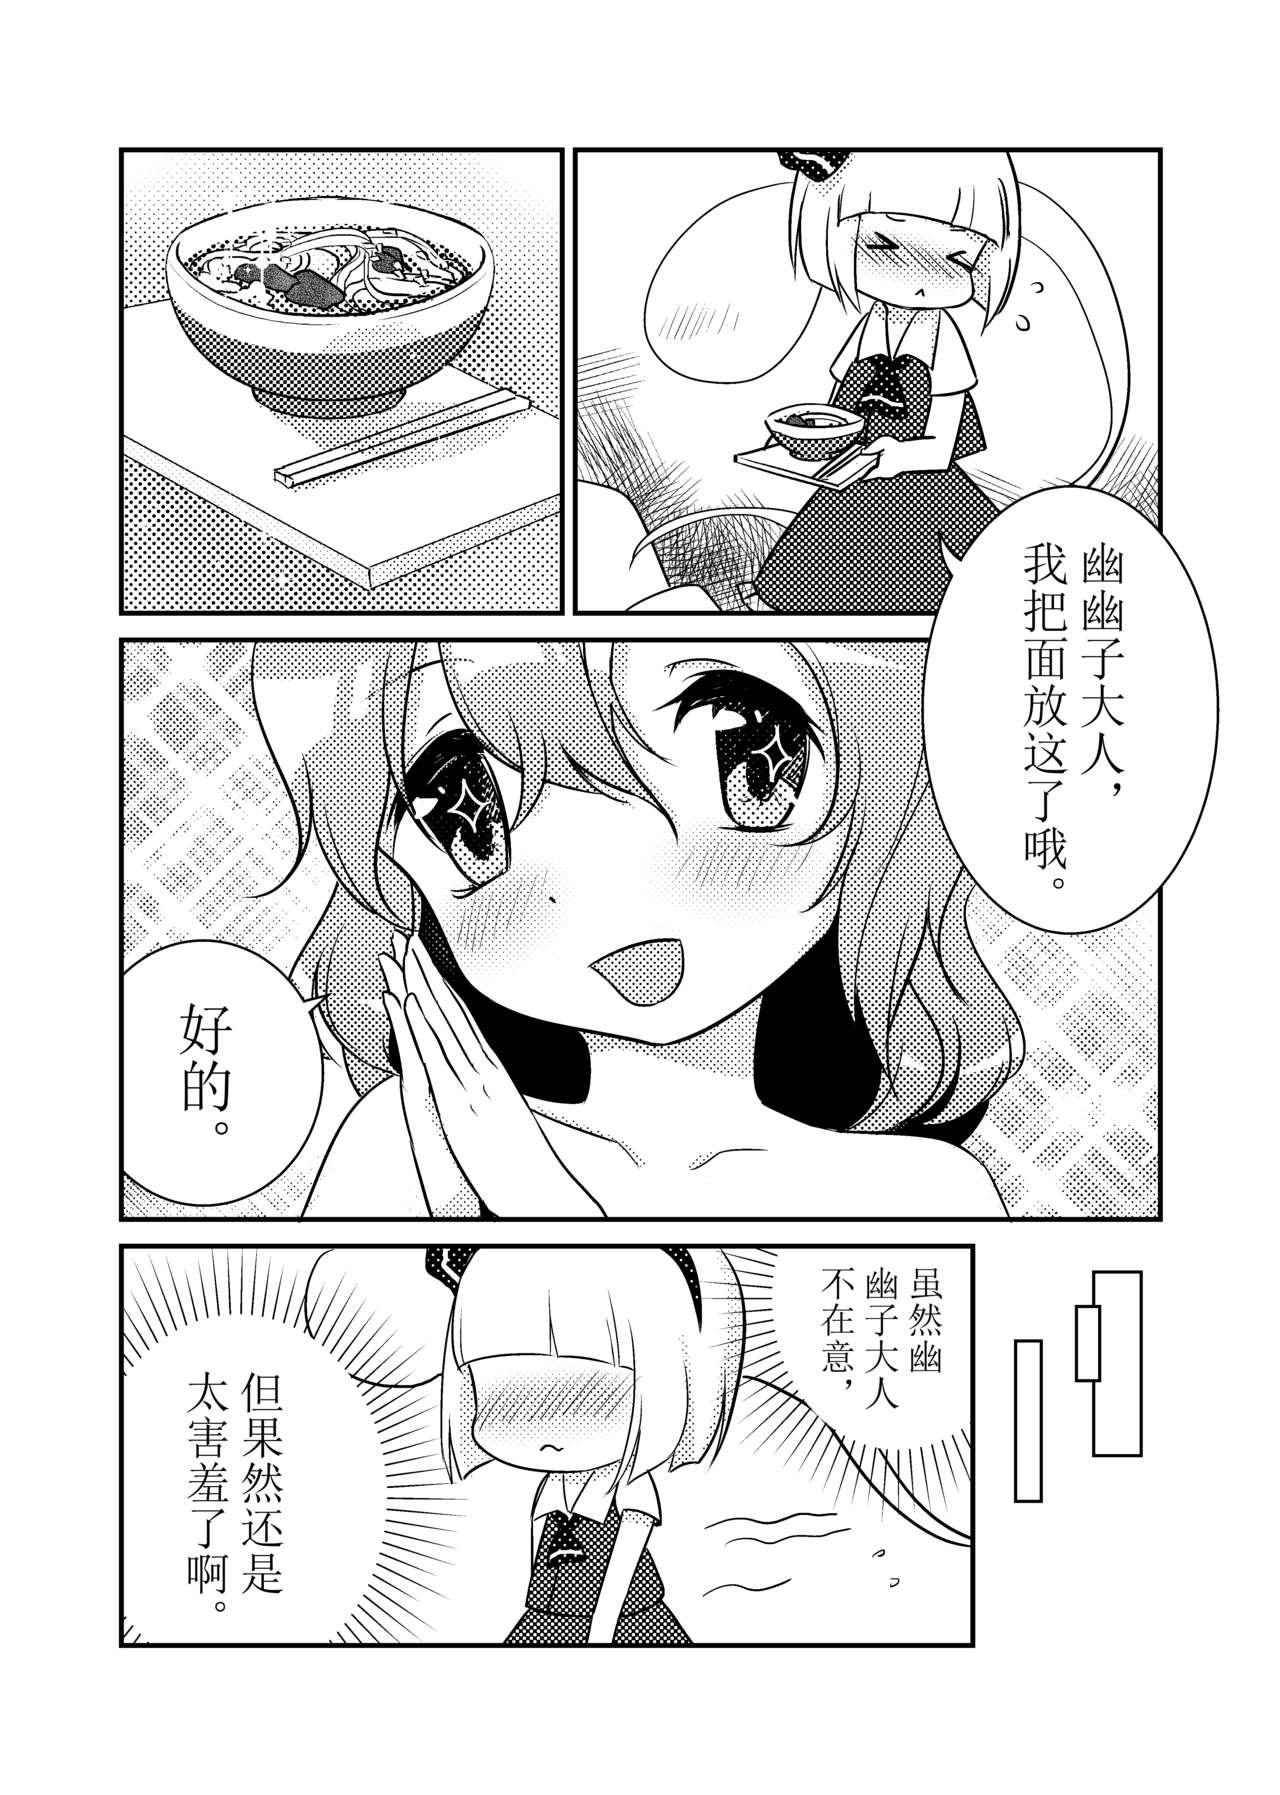 Boobs ????一起泡温泉吧！ - Touhou project Japanese - Page 4